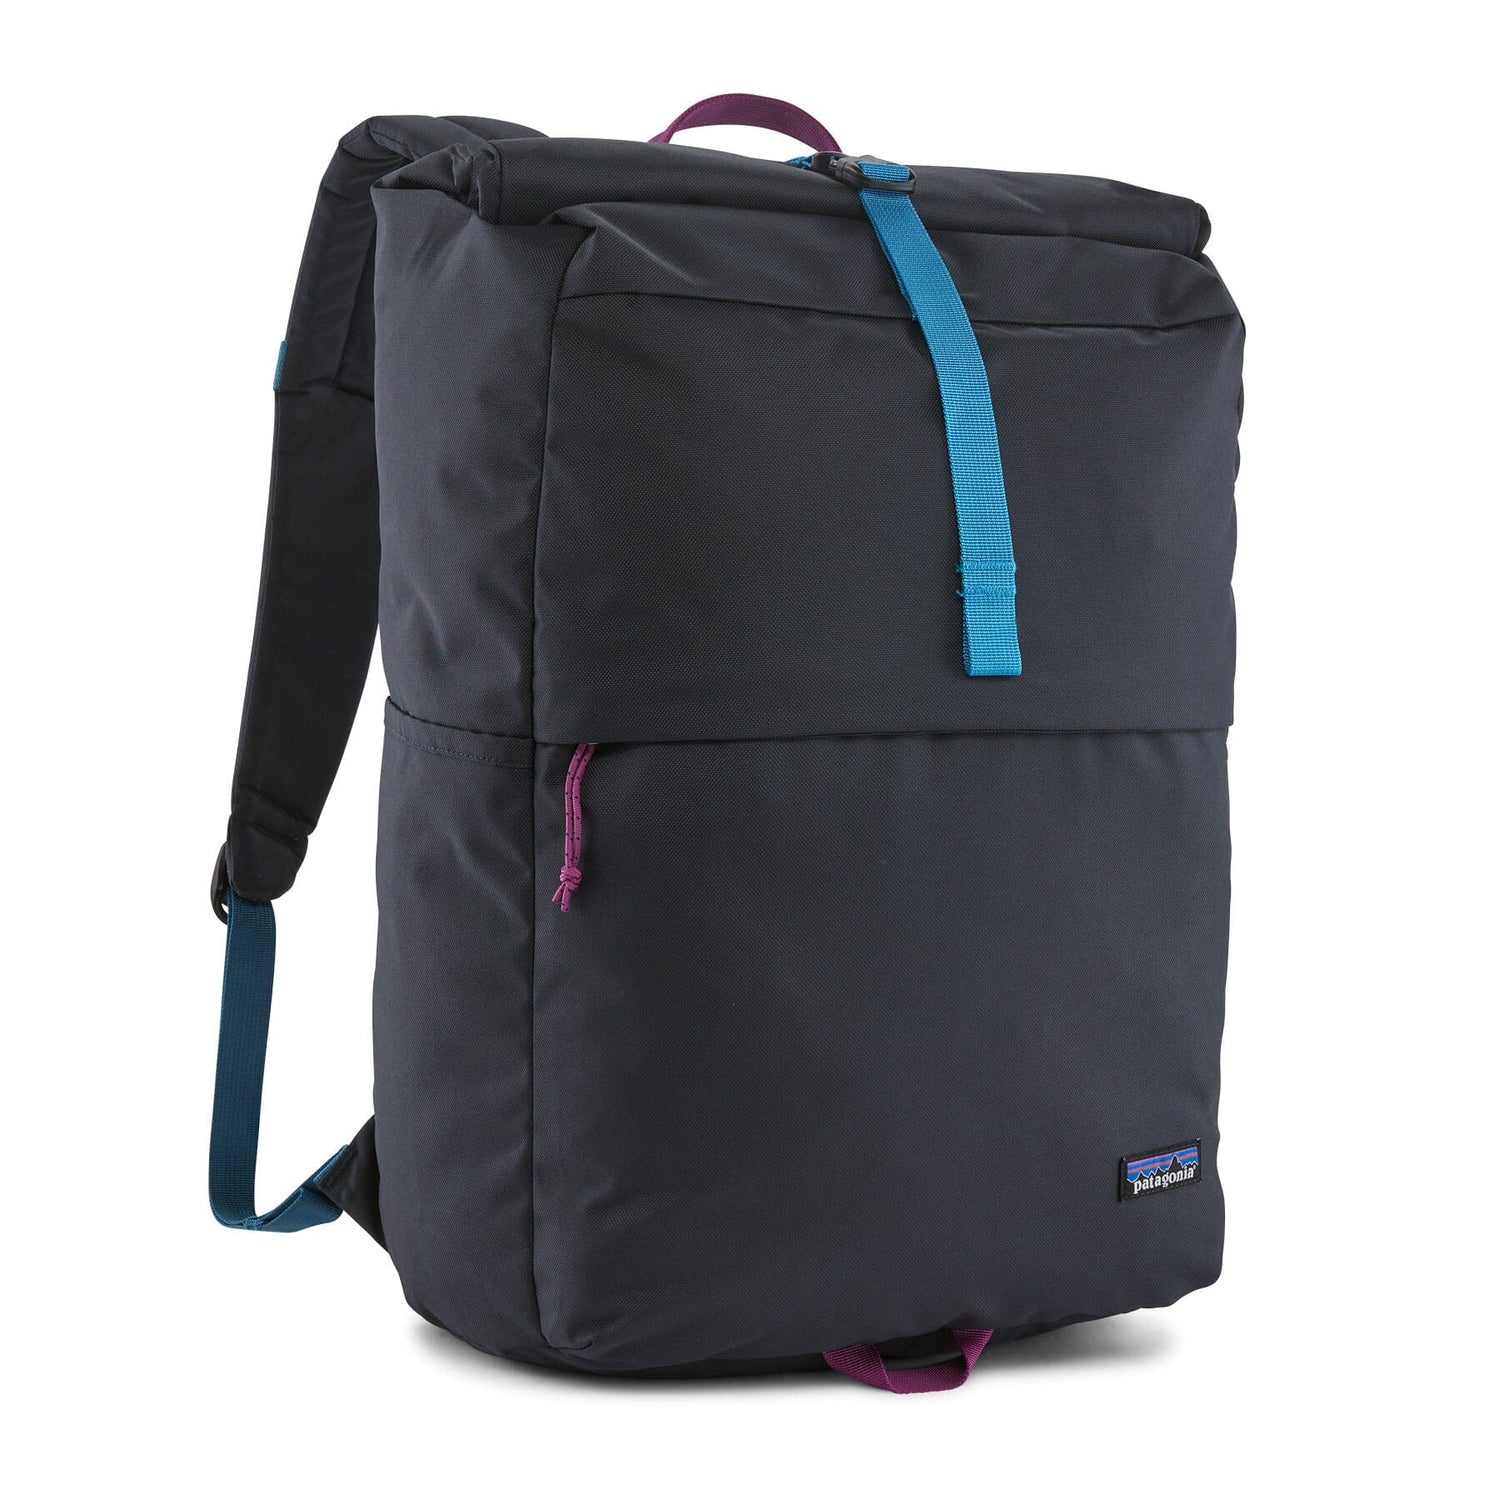 Patagonia Fieldsmith Roll Top Pack 30l - 100% Recycled Polyester Patchwork: Coriander Brown Bags